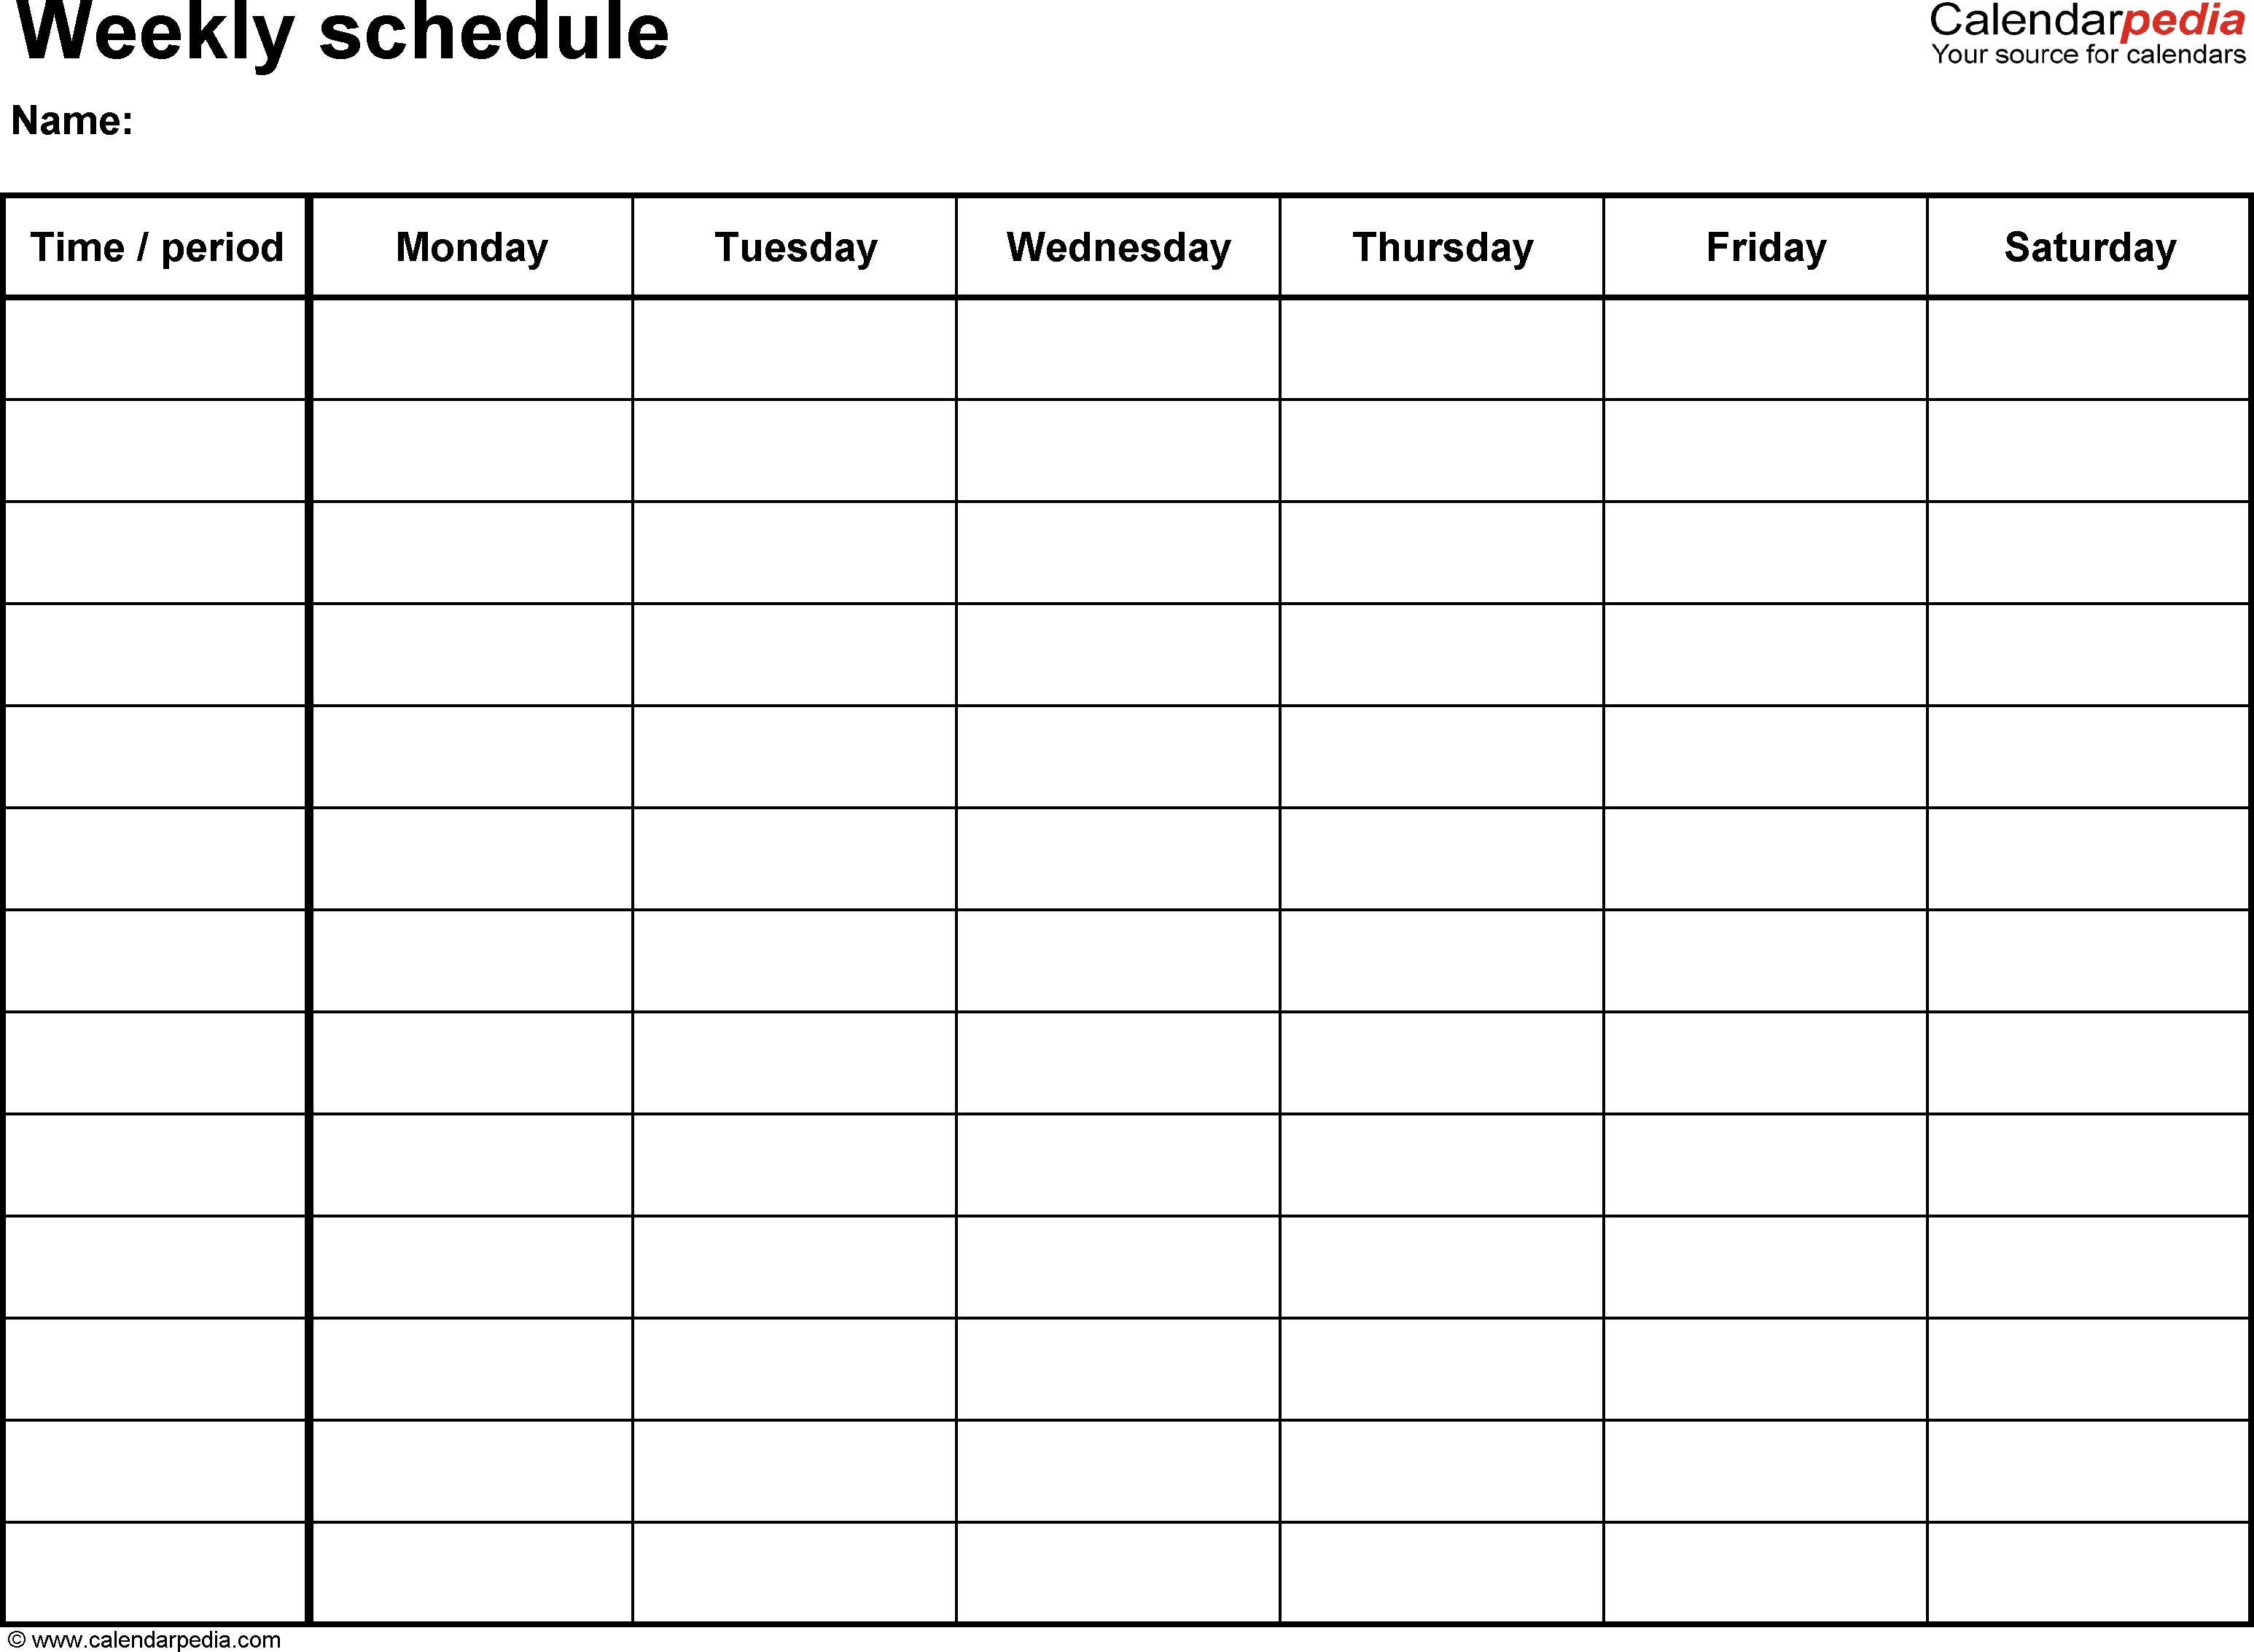 Free Weekly Schedule Templates For Excel - 18 Templates Weekly Calendar Template Xls